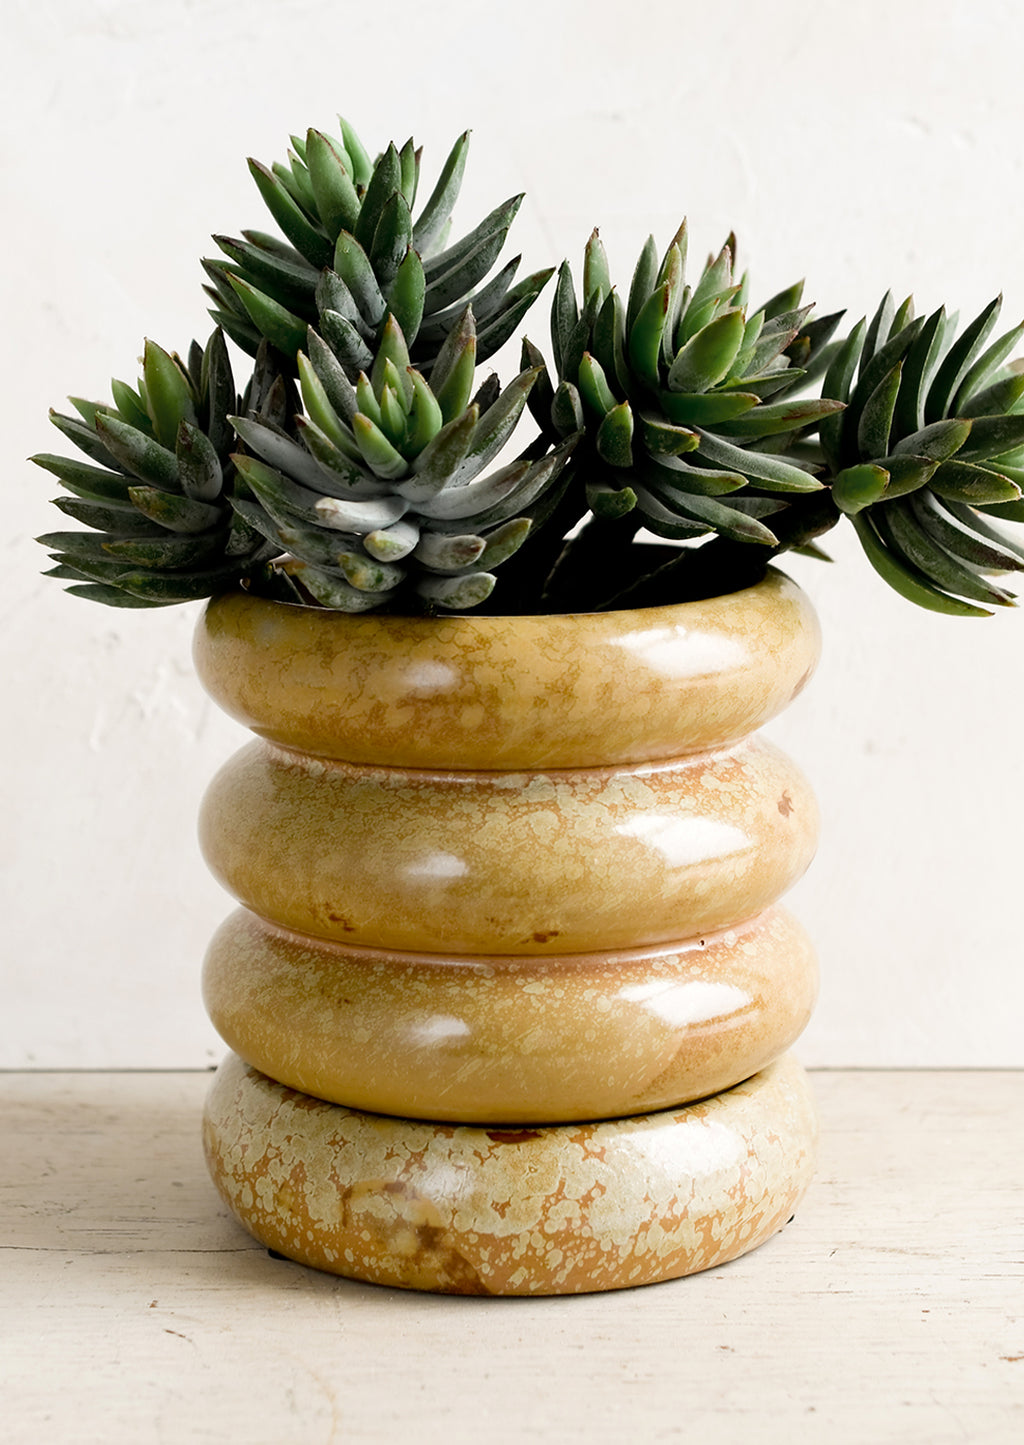 2: A curvy shaped planter in dappled brown glaze holding succulent plant.